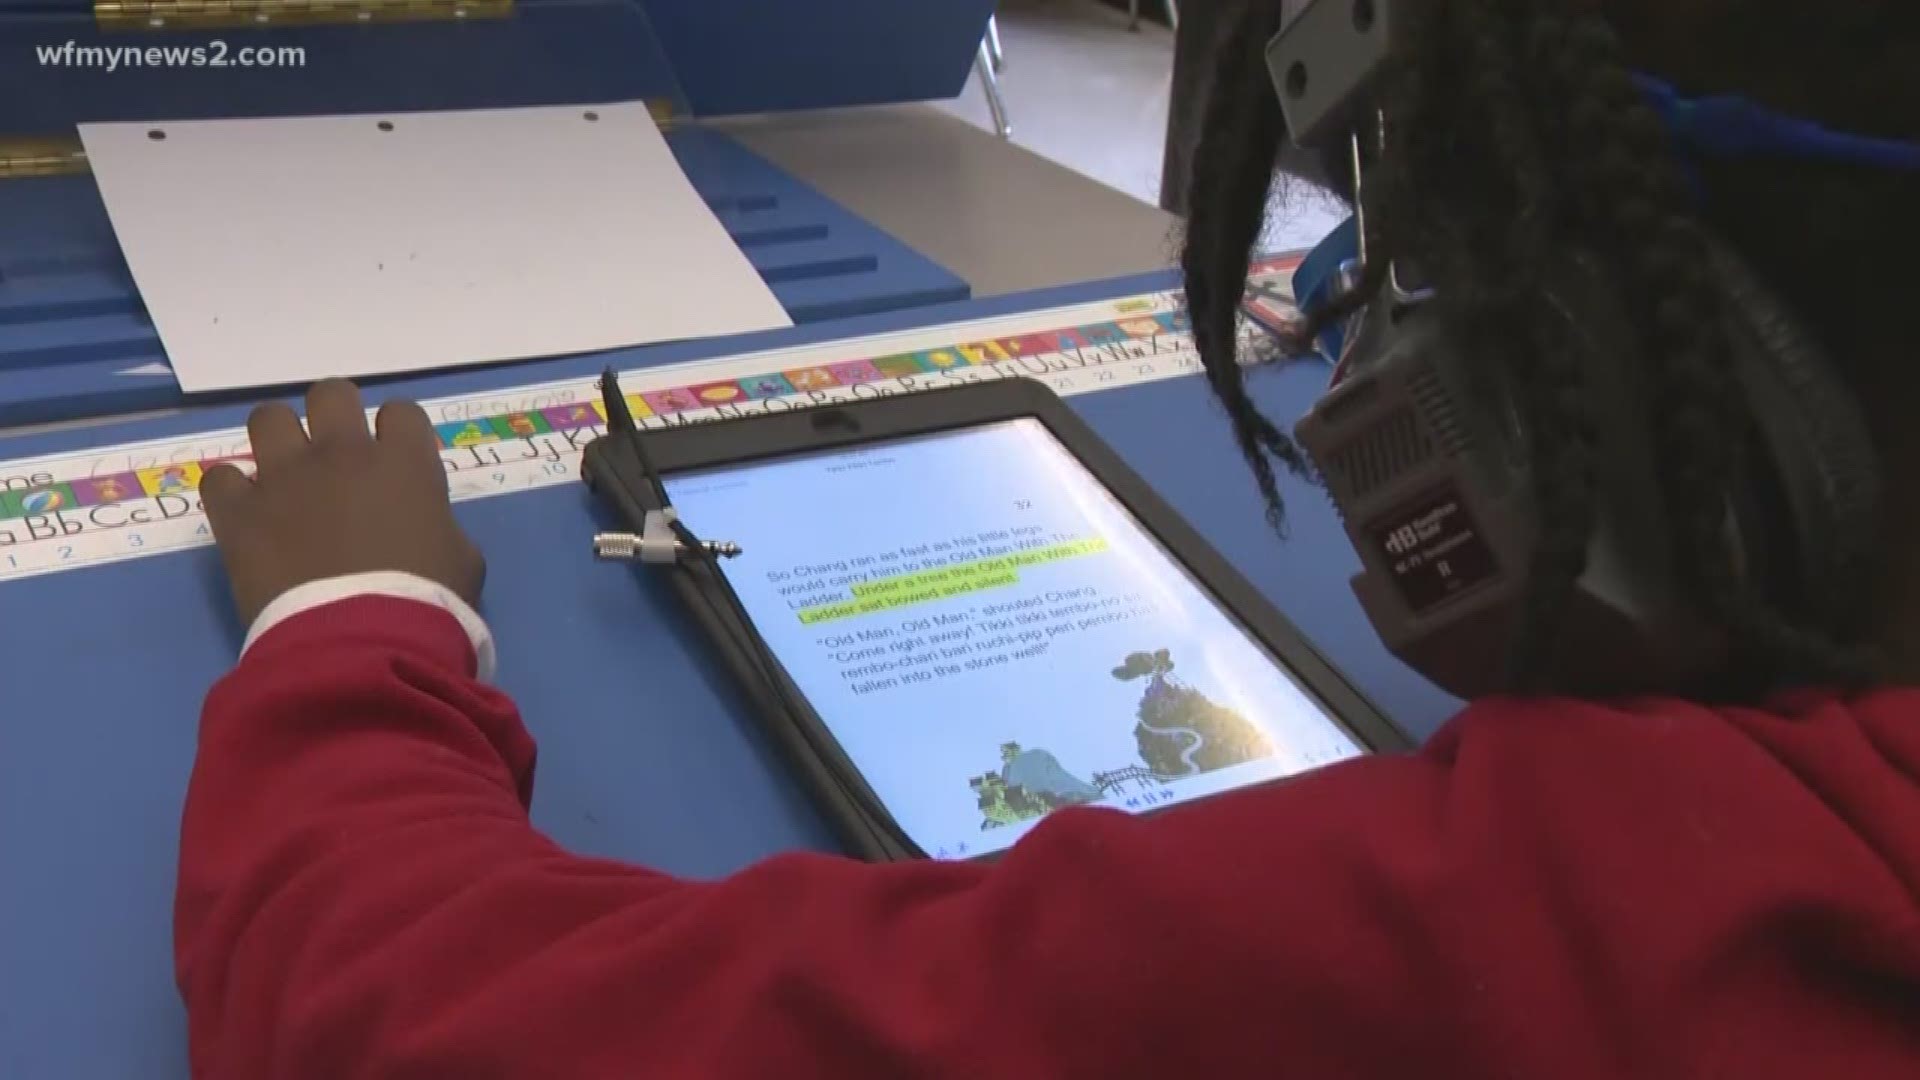 DPI says the delay in getting the ipads to classrooms started because of Hurricane Florence and its aftermath.